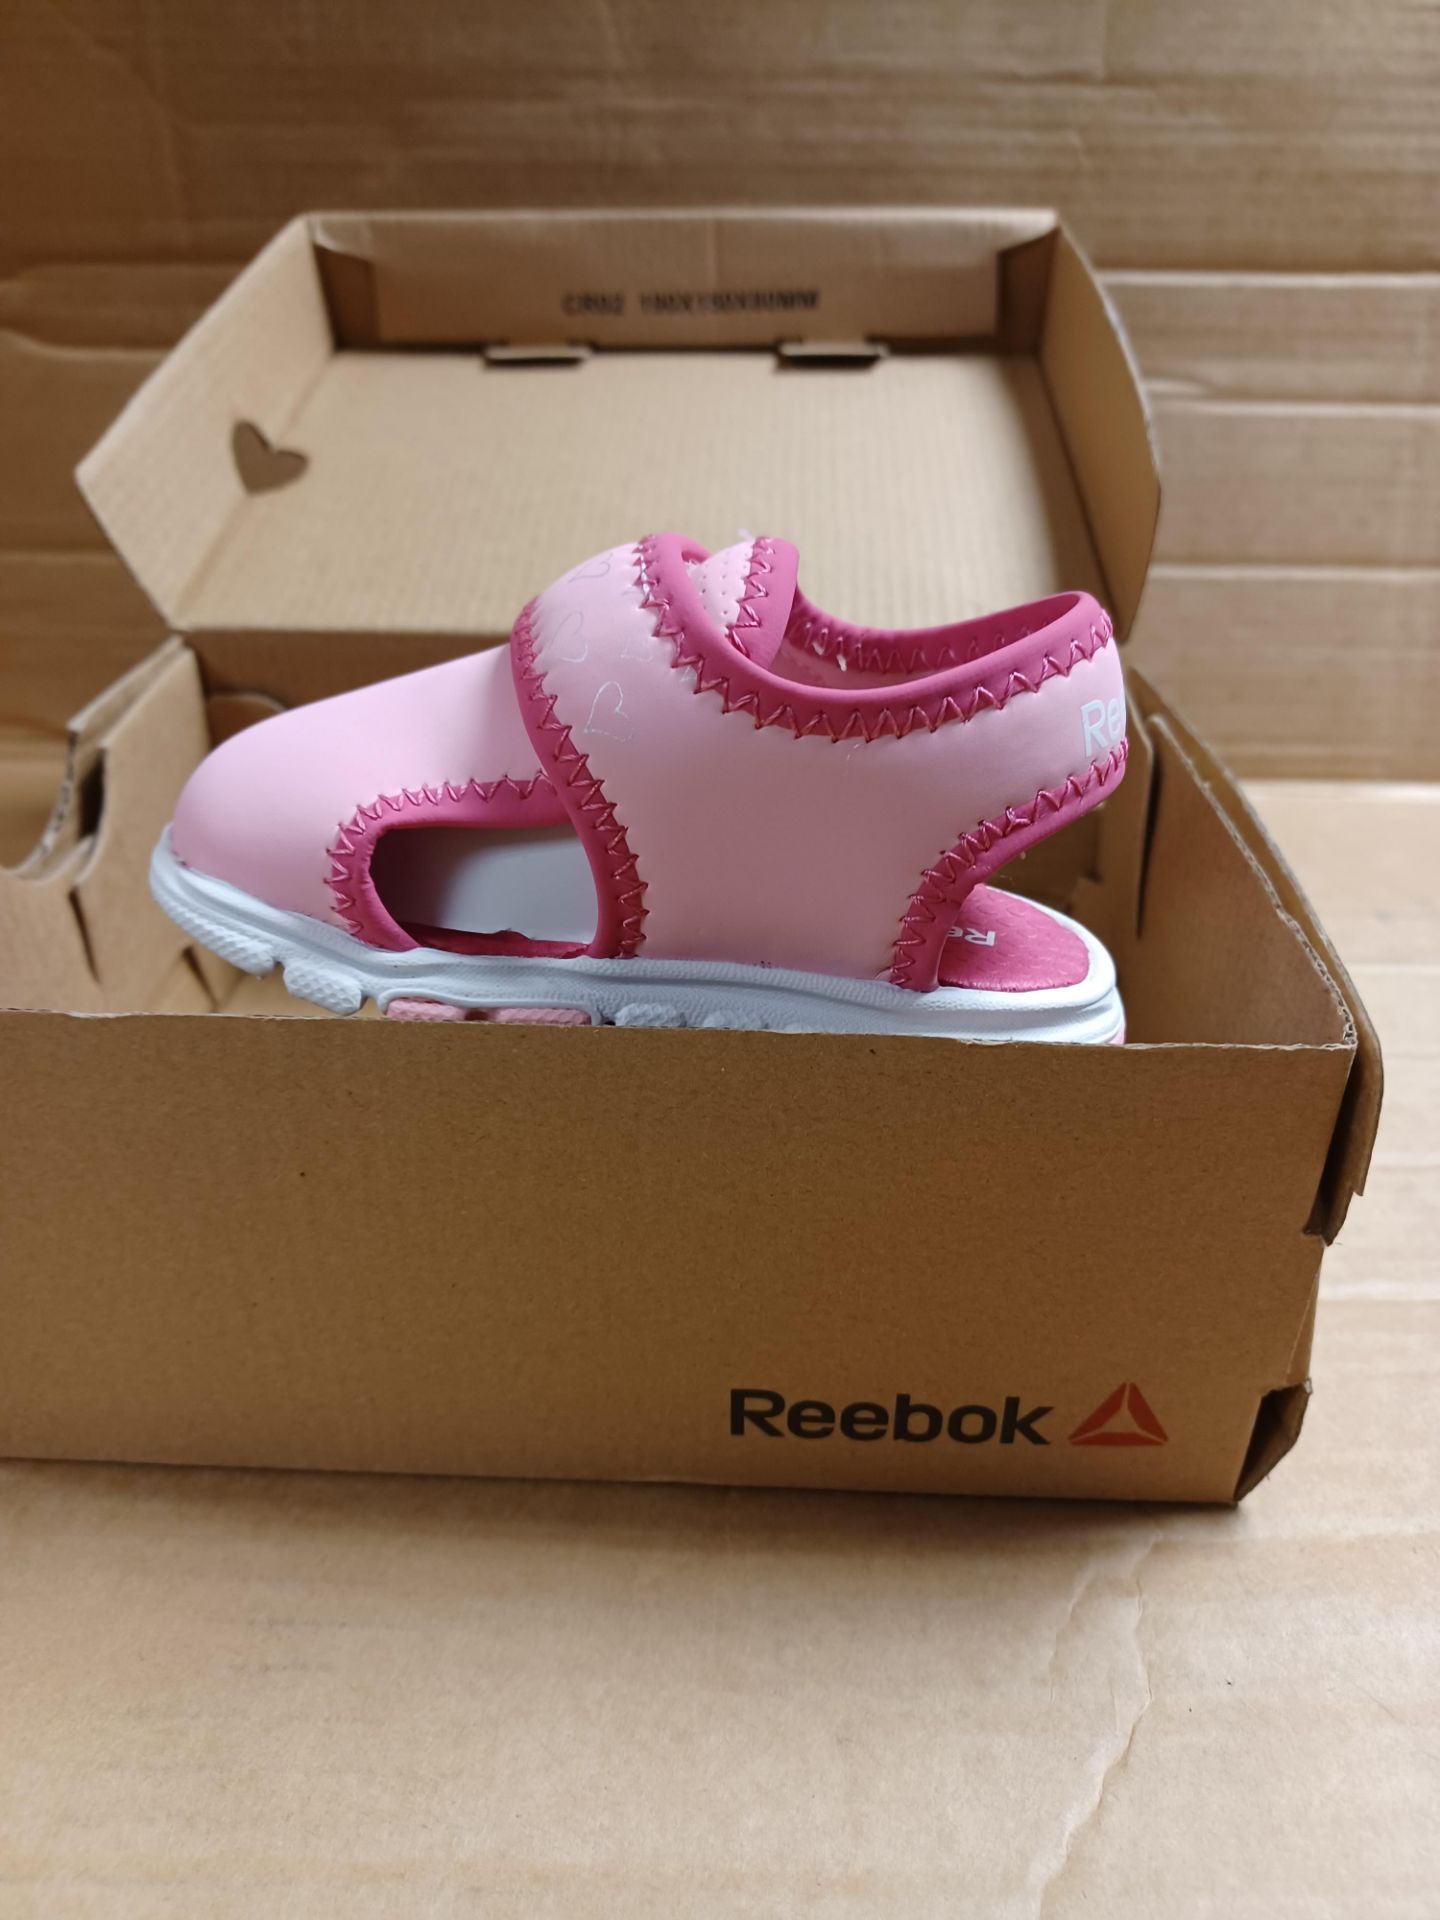 (NO VAT) 7 X NEW BOXED PAIRS OF REEBOK WAVE GLIDER TRAINERS. EBR